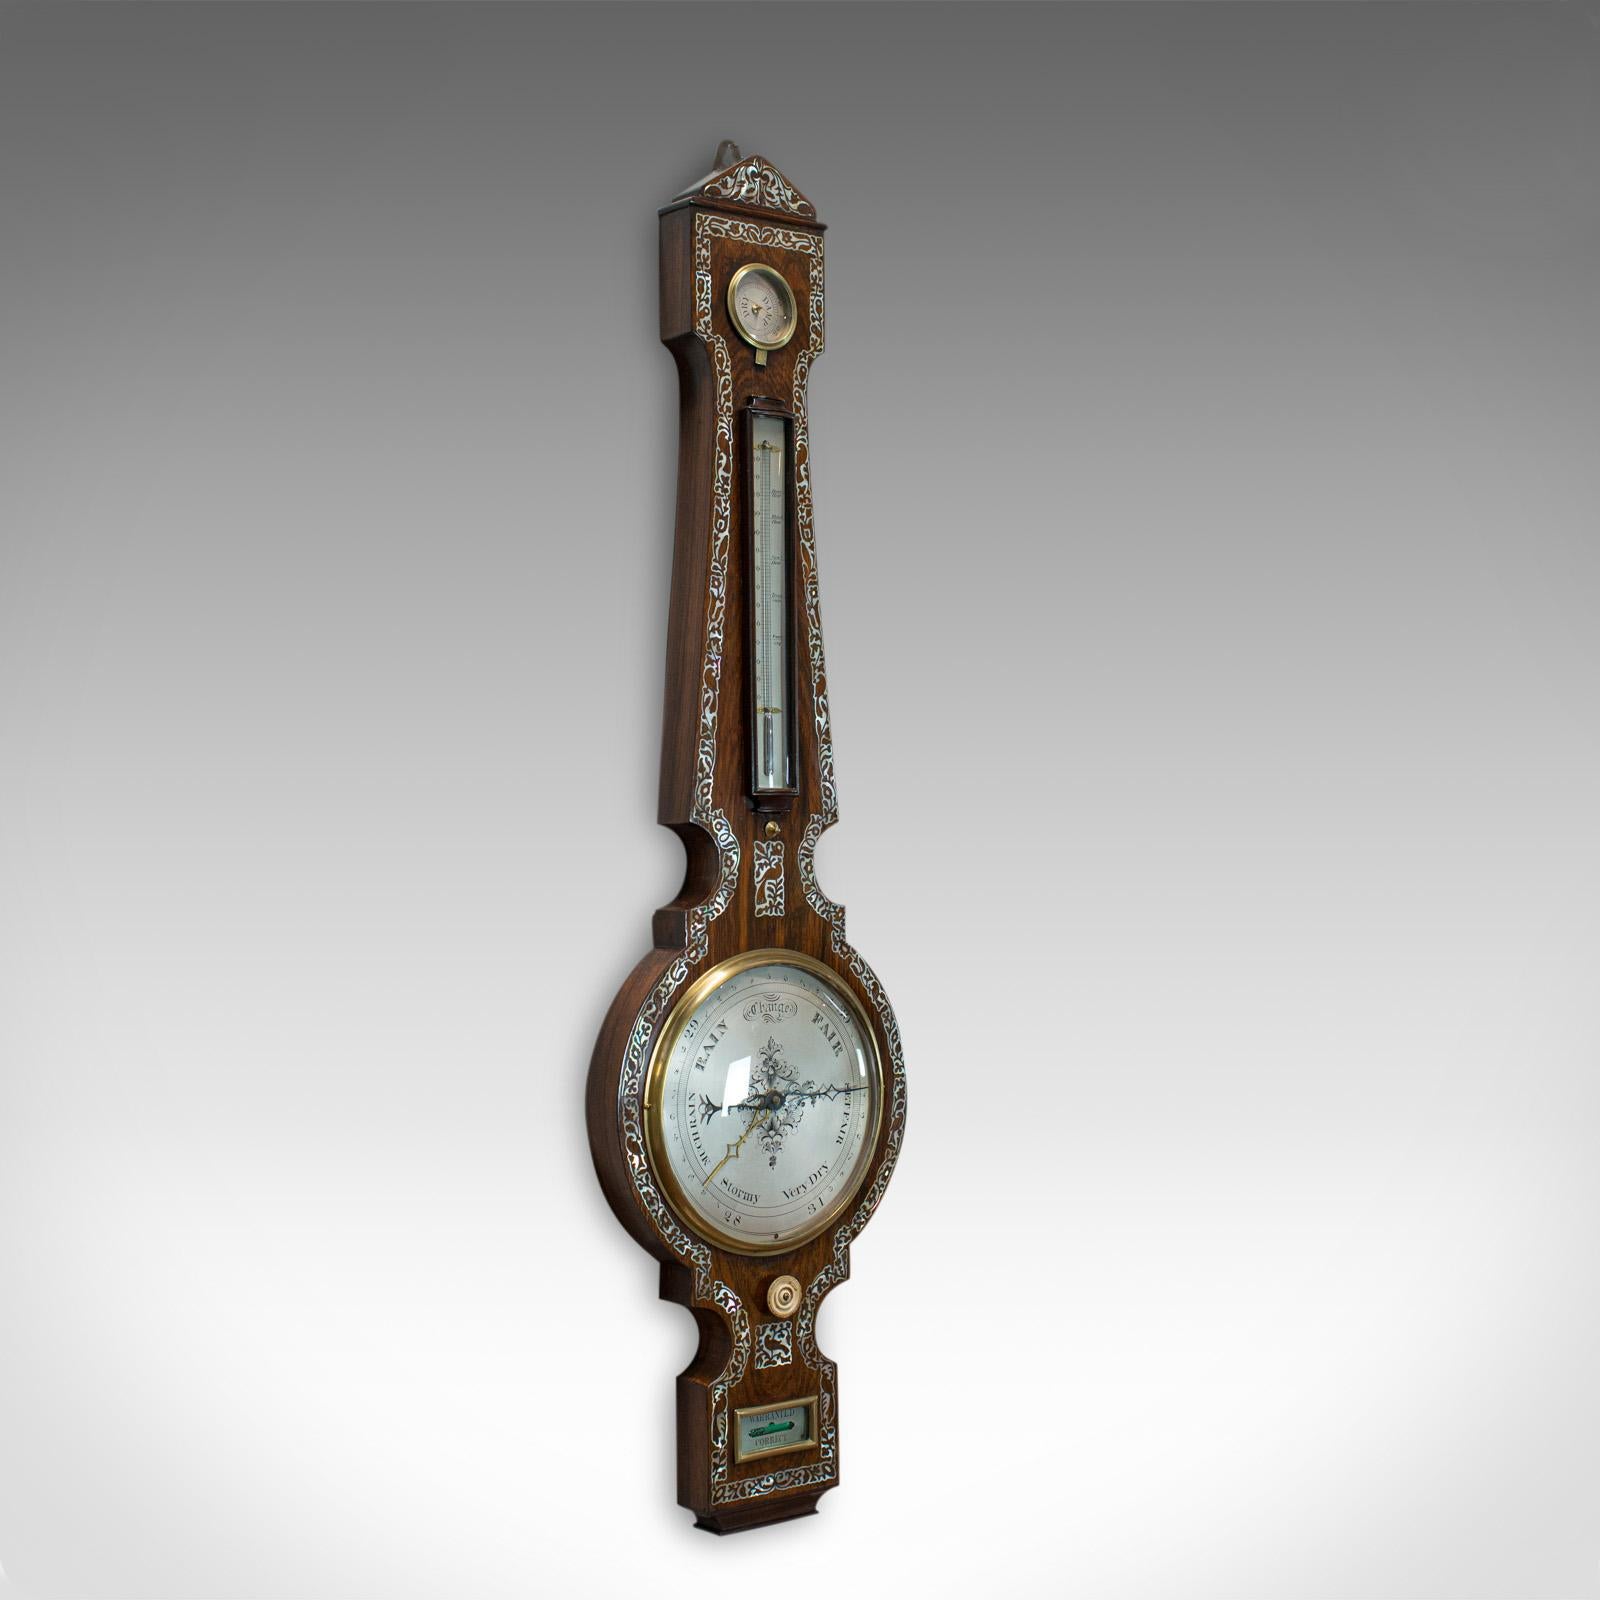 This is an antique banjo barometer. An English, rosewood and mother of pearl barometer dating to the Victorian period in the late 19th century, circa 1900.

Select rosewood displays wonderful grain interest and a desirable aged patina
Profusely